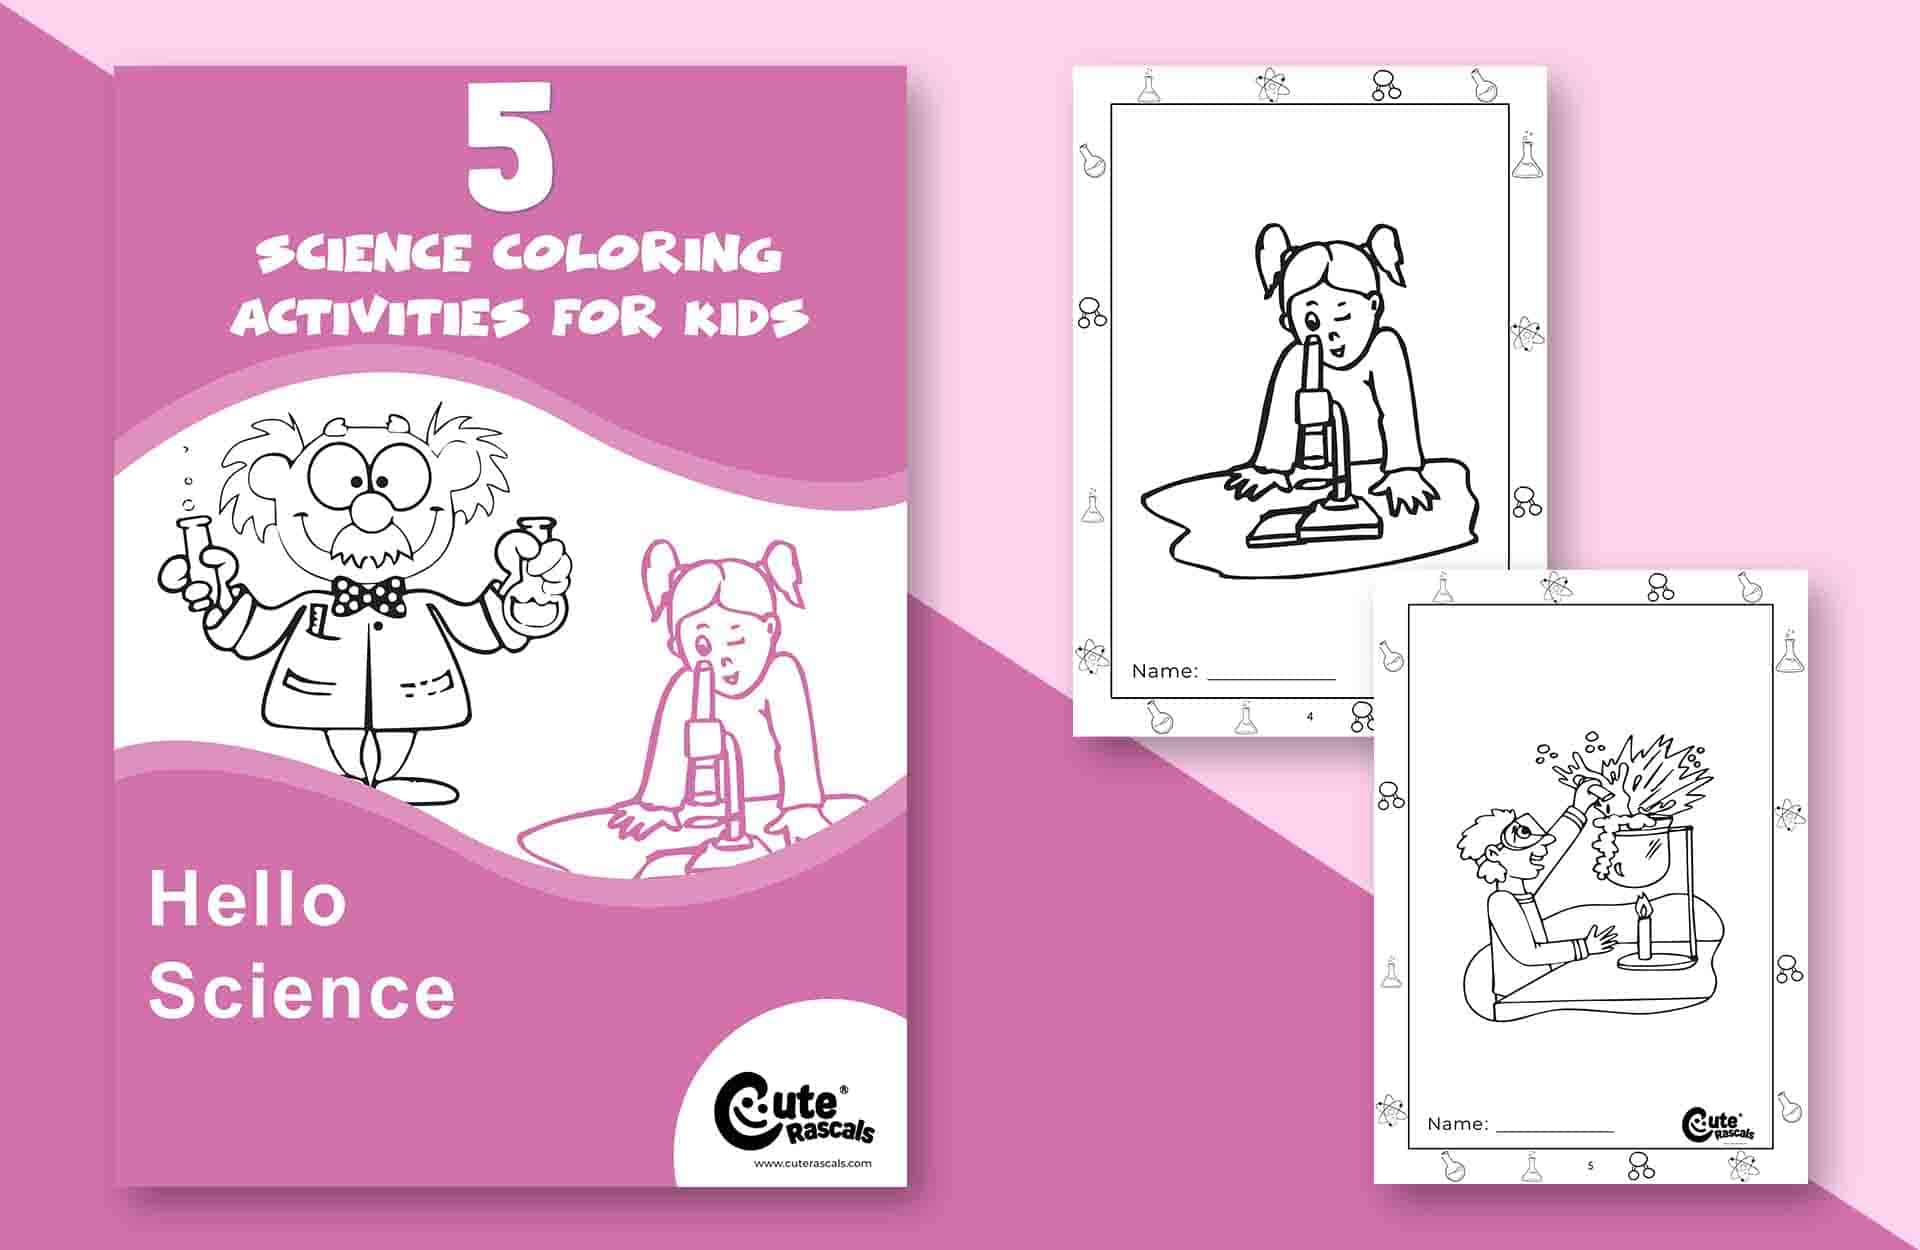 5 Science Coloring Activities for Kids to Be Smart